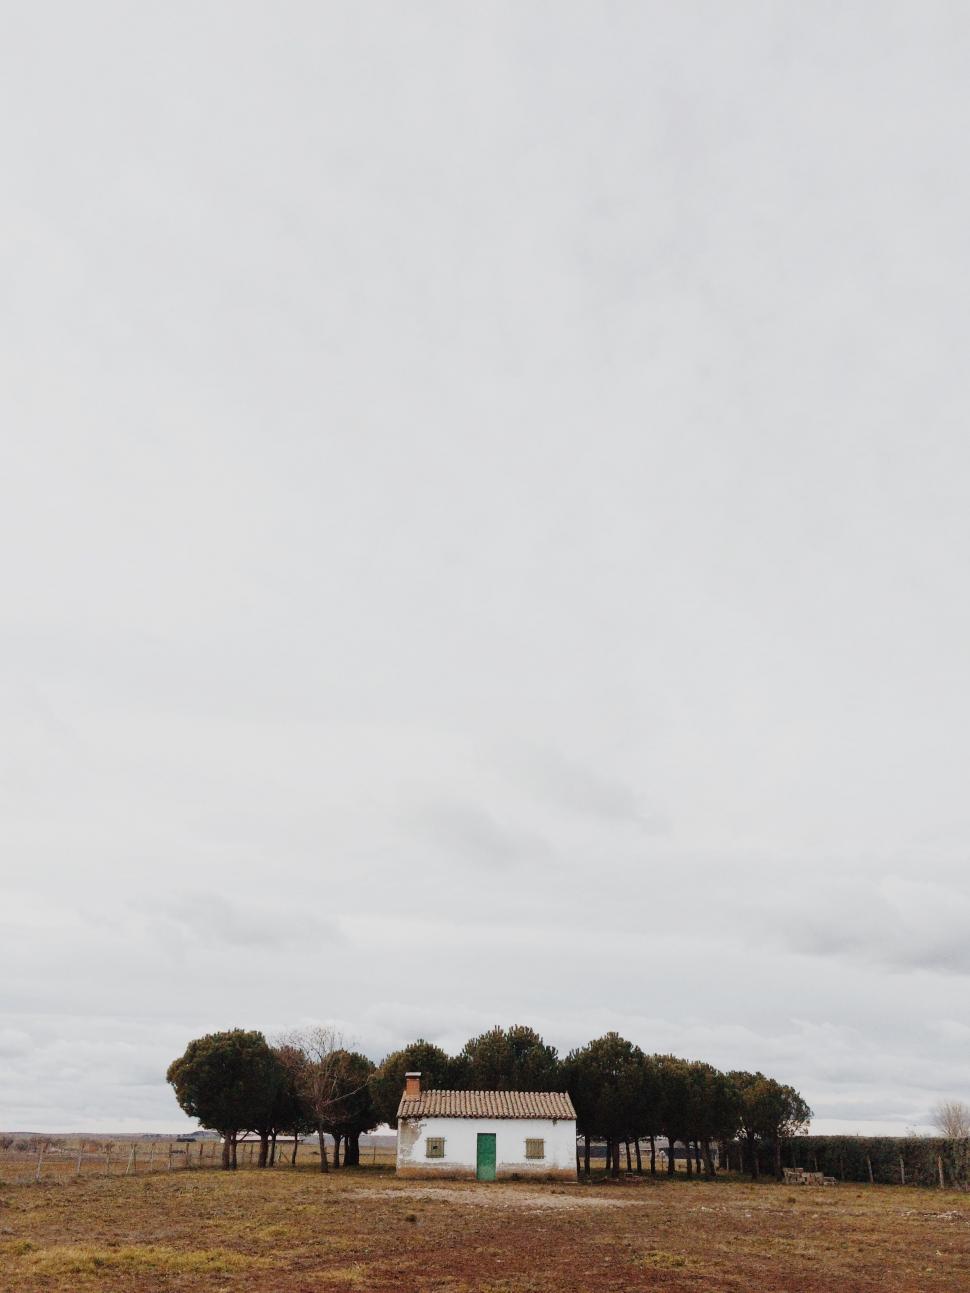 Free Image of House in a Field With Trees 